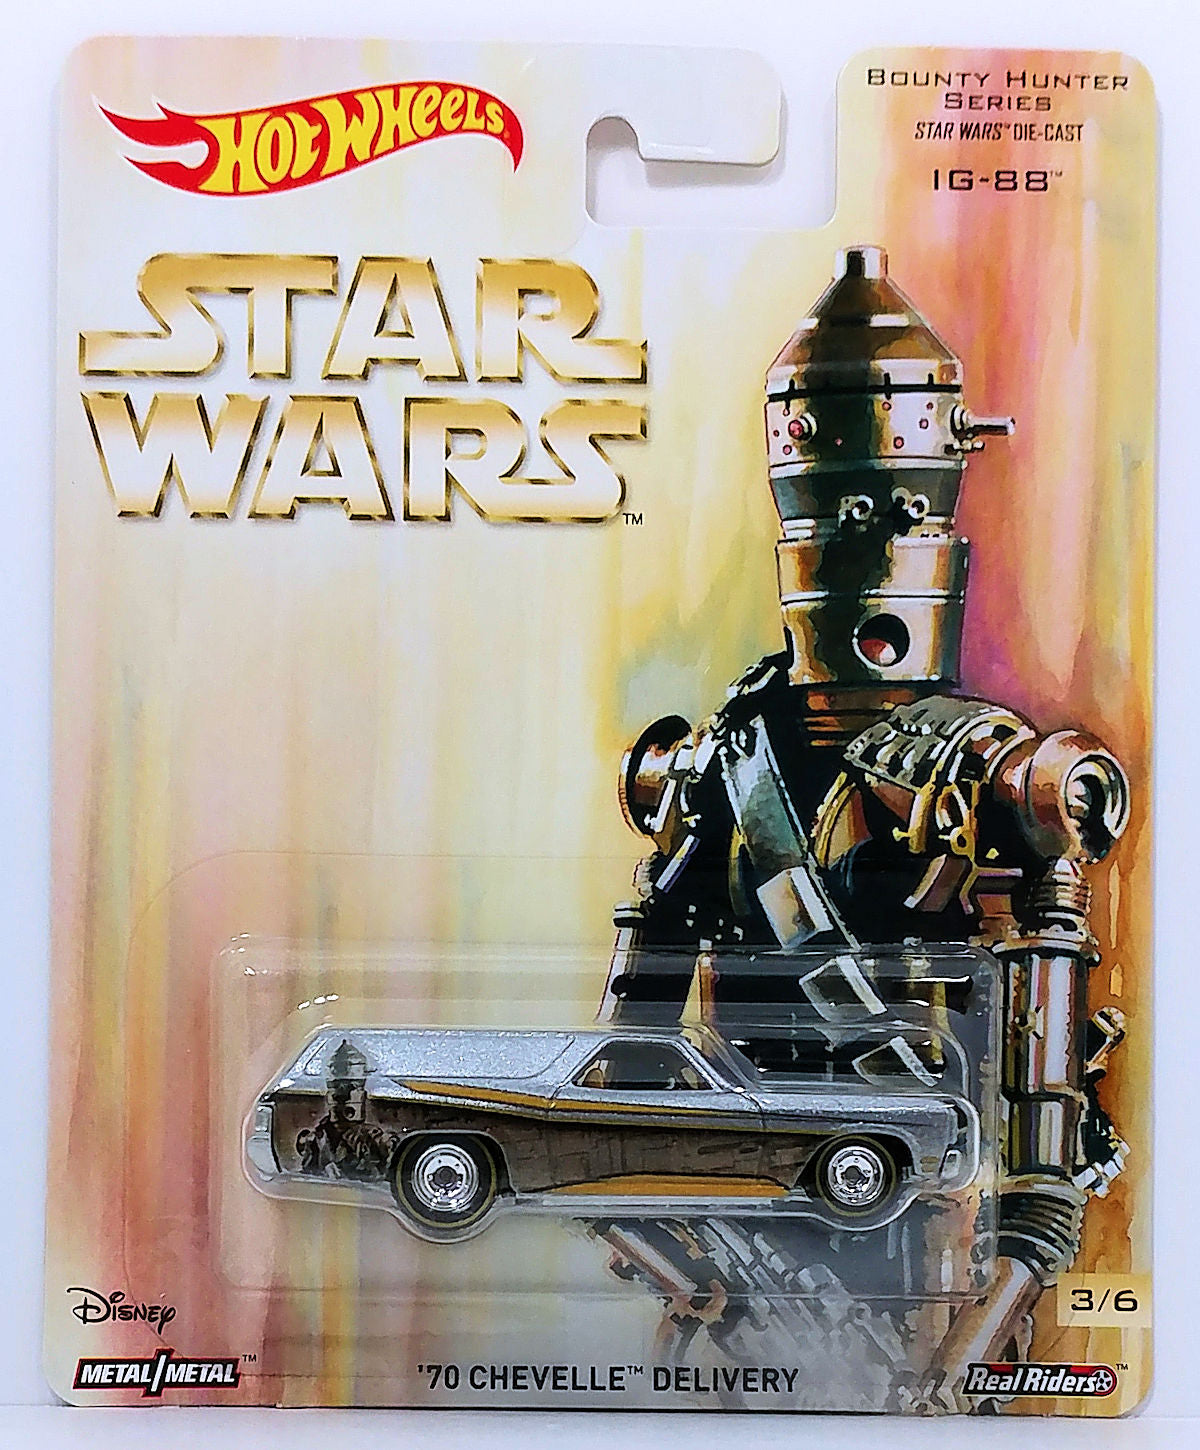 Hot Wheels 2017 - Pop Culture / Star Wars / Bounty Hunter Series 3/6 -'70 Chevelle Delivery - Metallic Gray / IG-88 - Metal/Metal & Real Riders